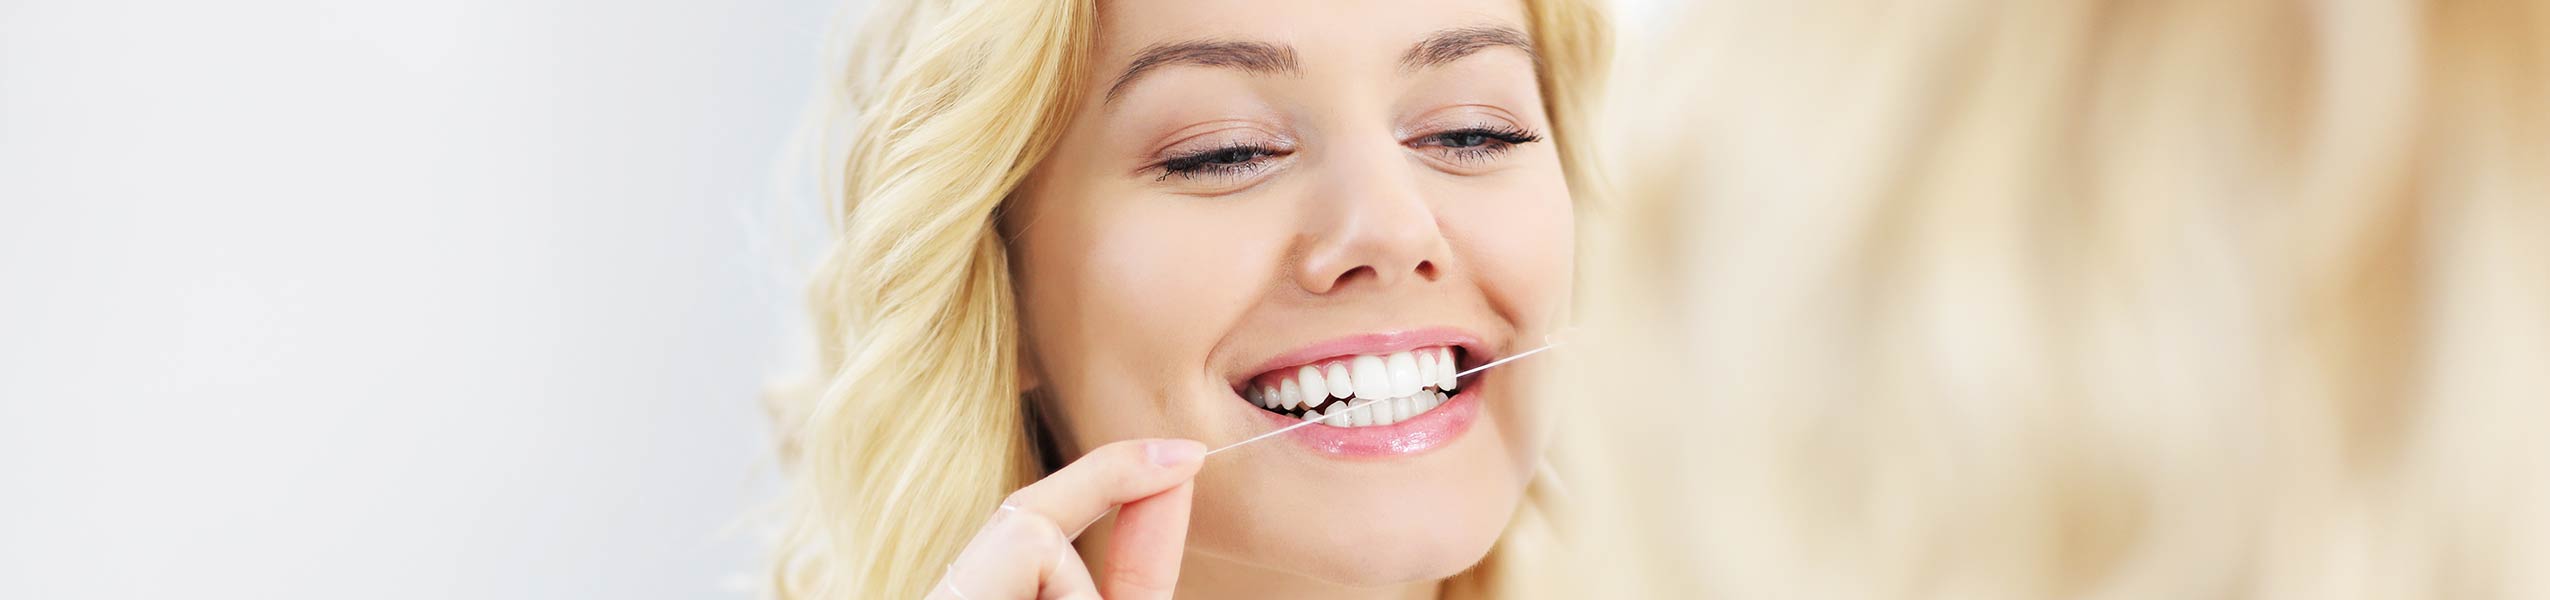 Blonde girl flossing her teeth while smiling.